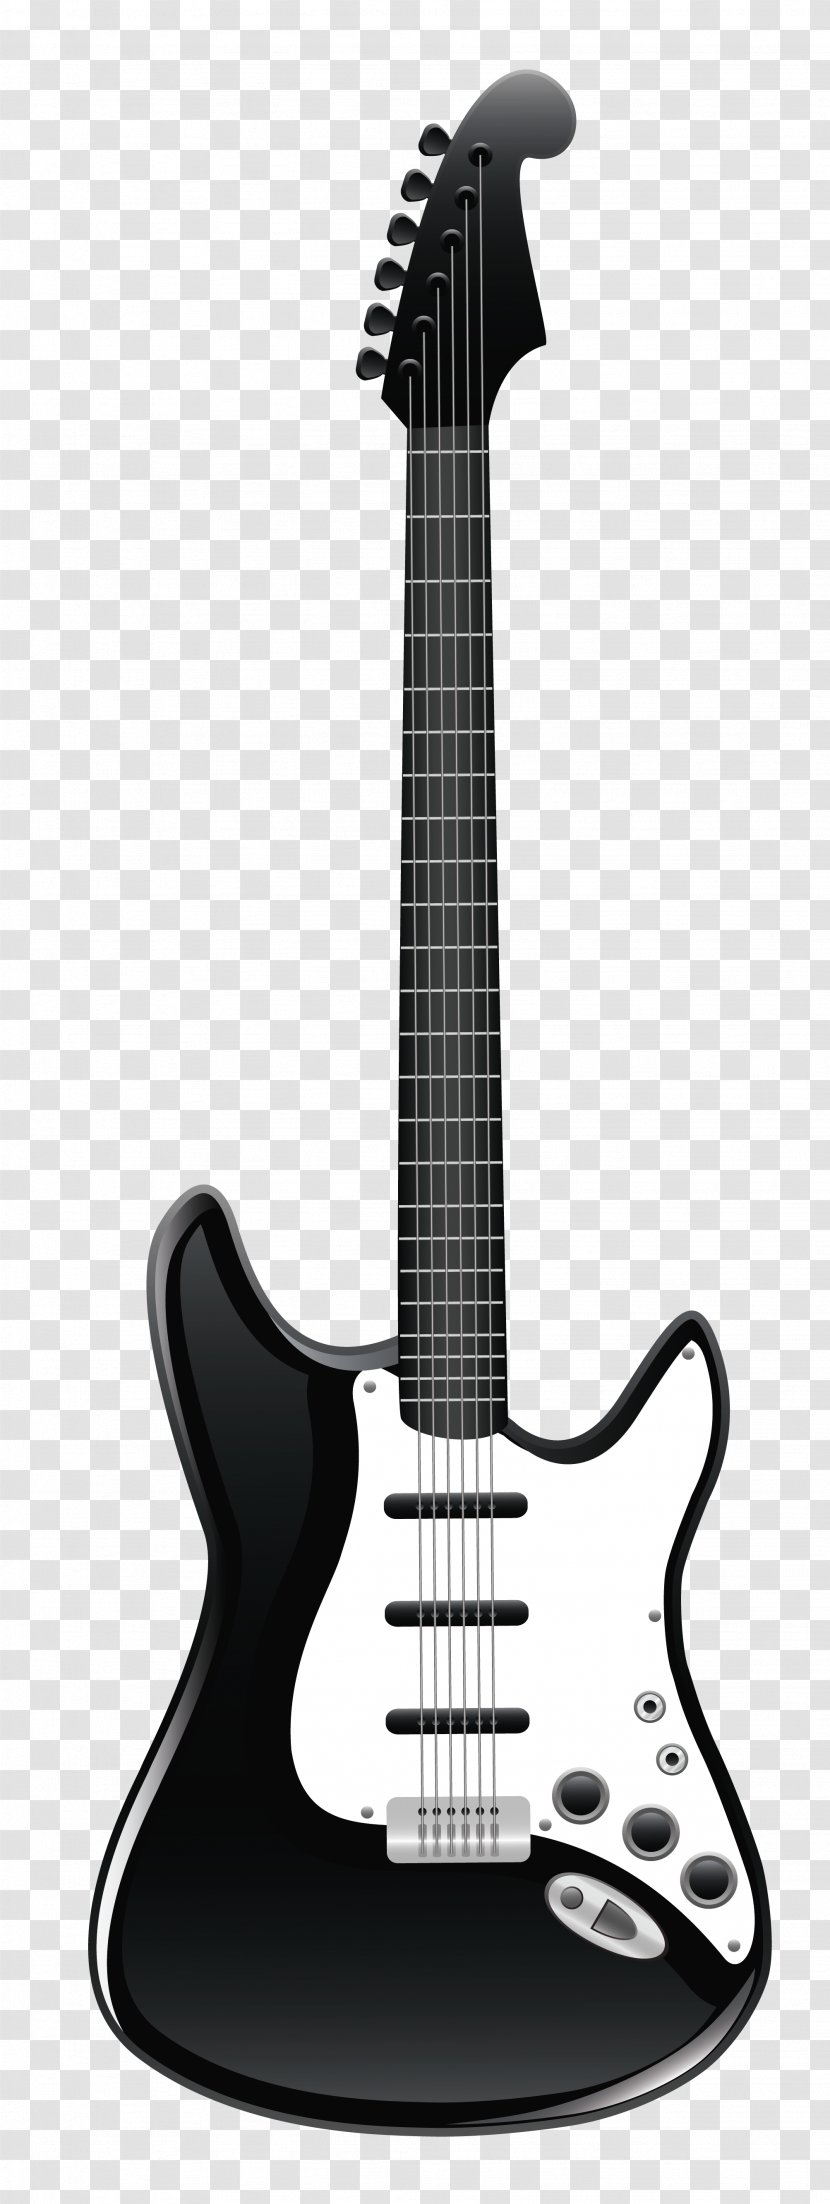 Guitar Clip Art - Silhouette - Black And White Clipart Transparent PNG